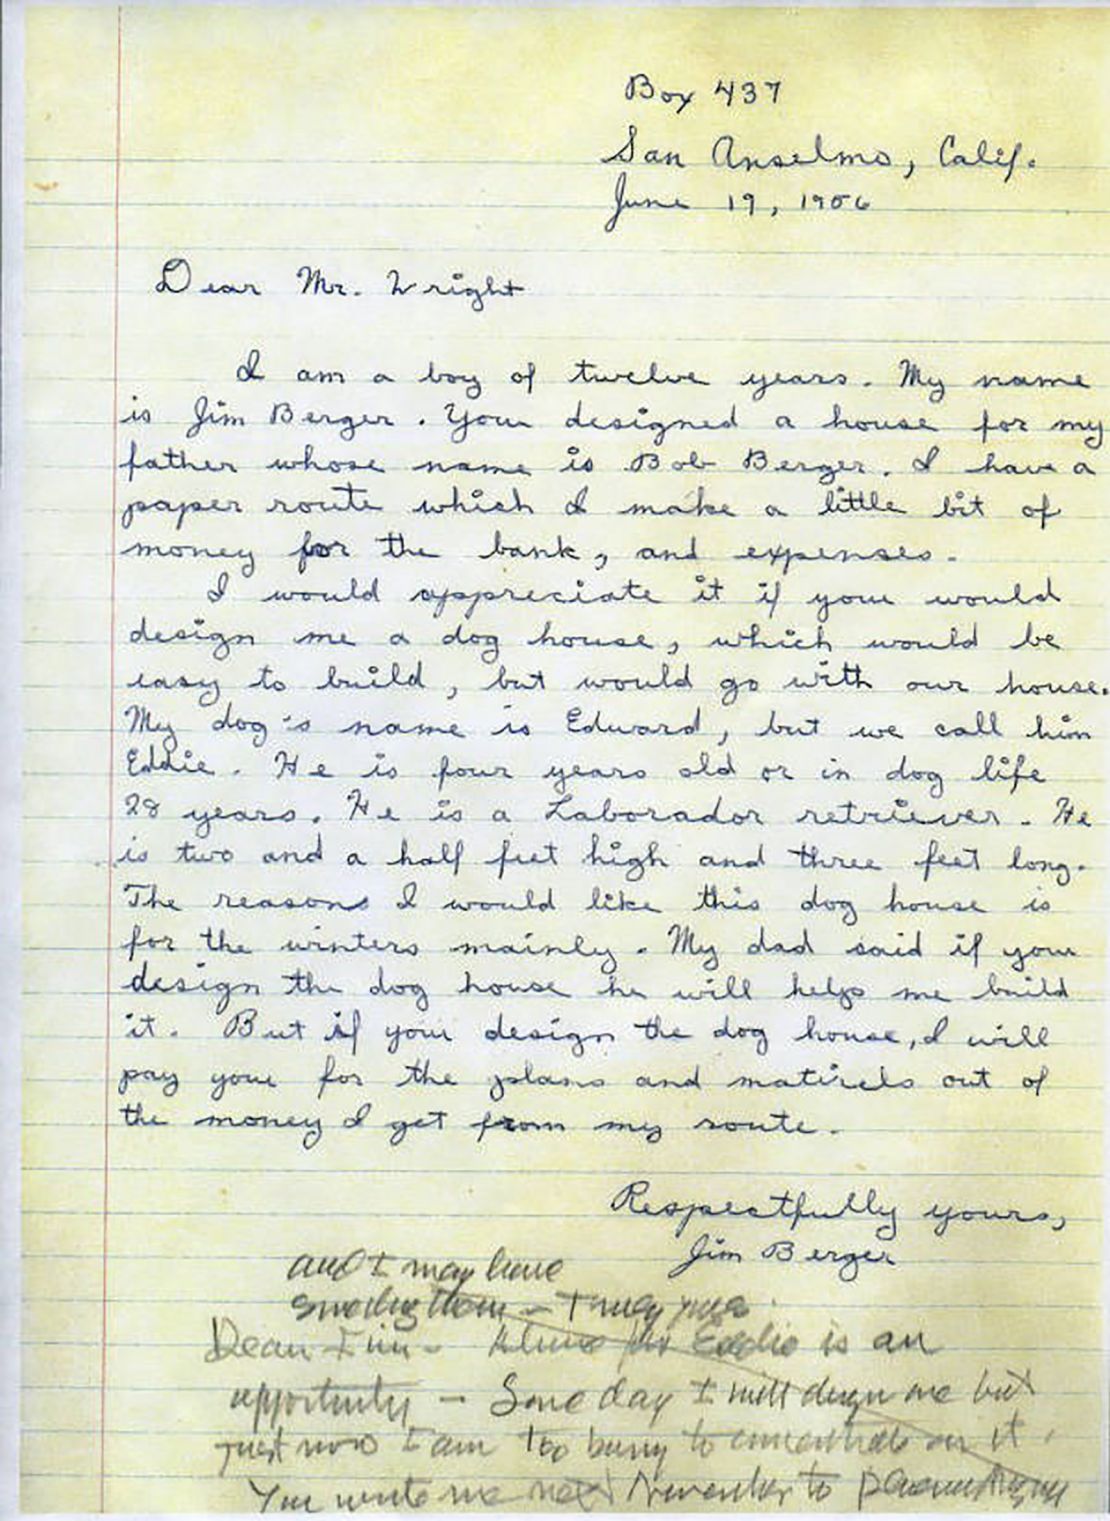 The letter Berger wrote Wright.